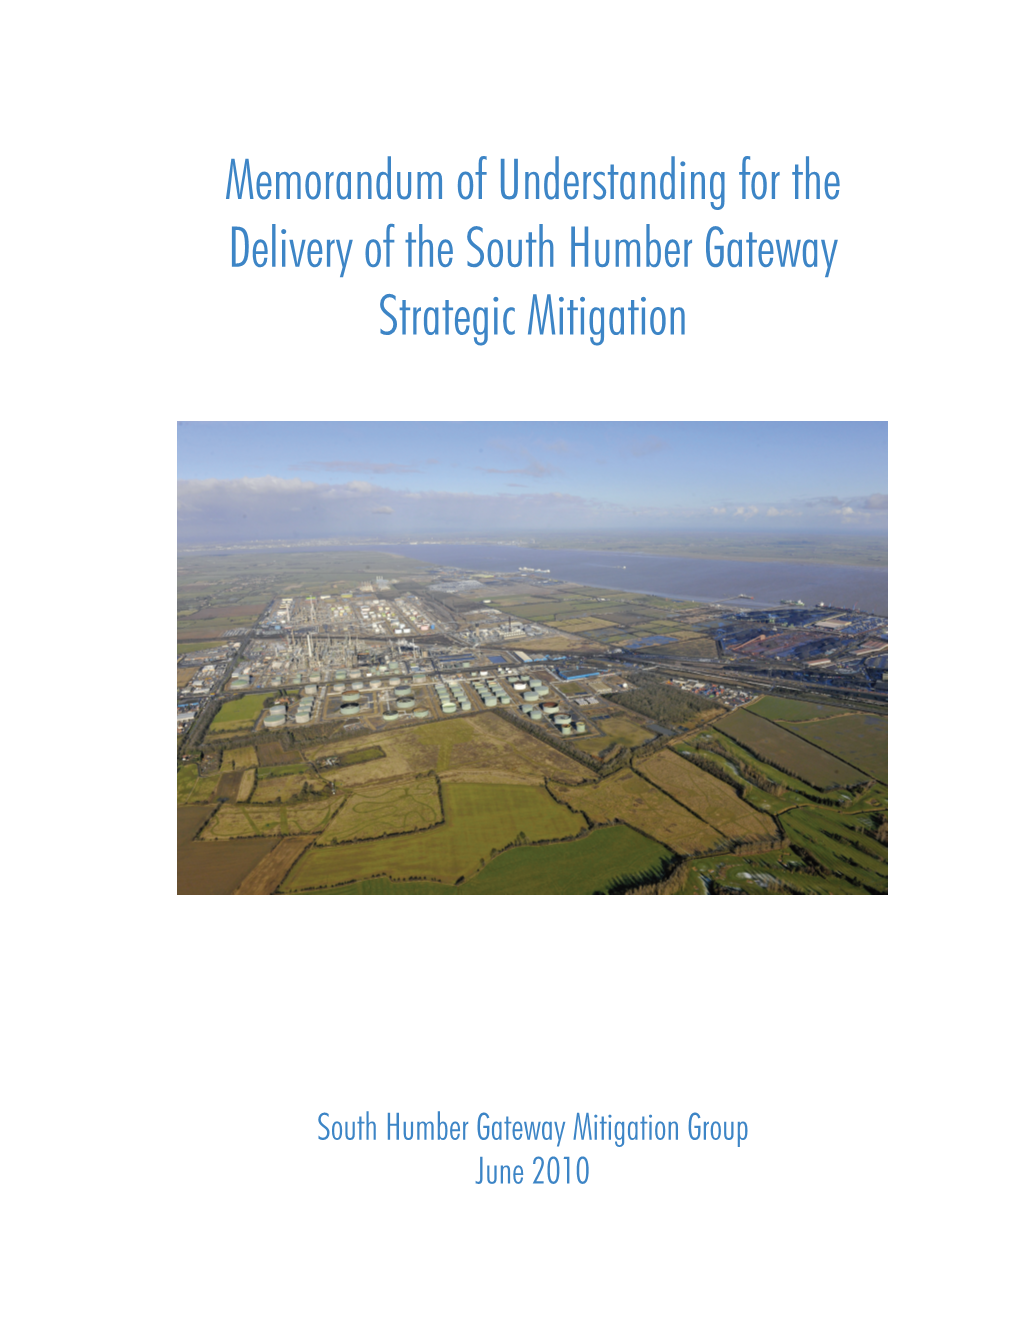 Memorandum of Understanding for the Delivery of the South Humber Gateway Strategic Mitigation